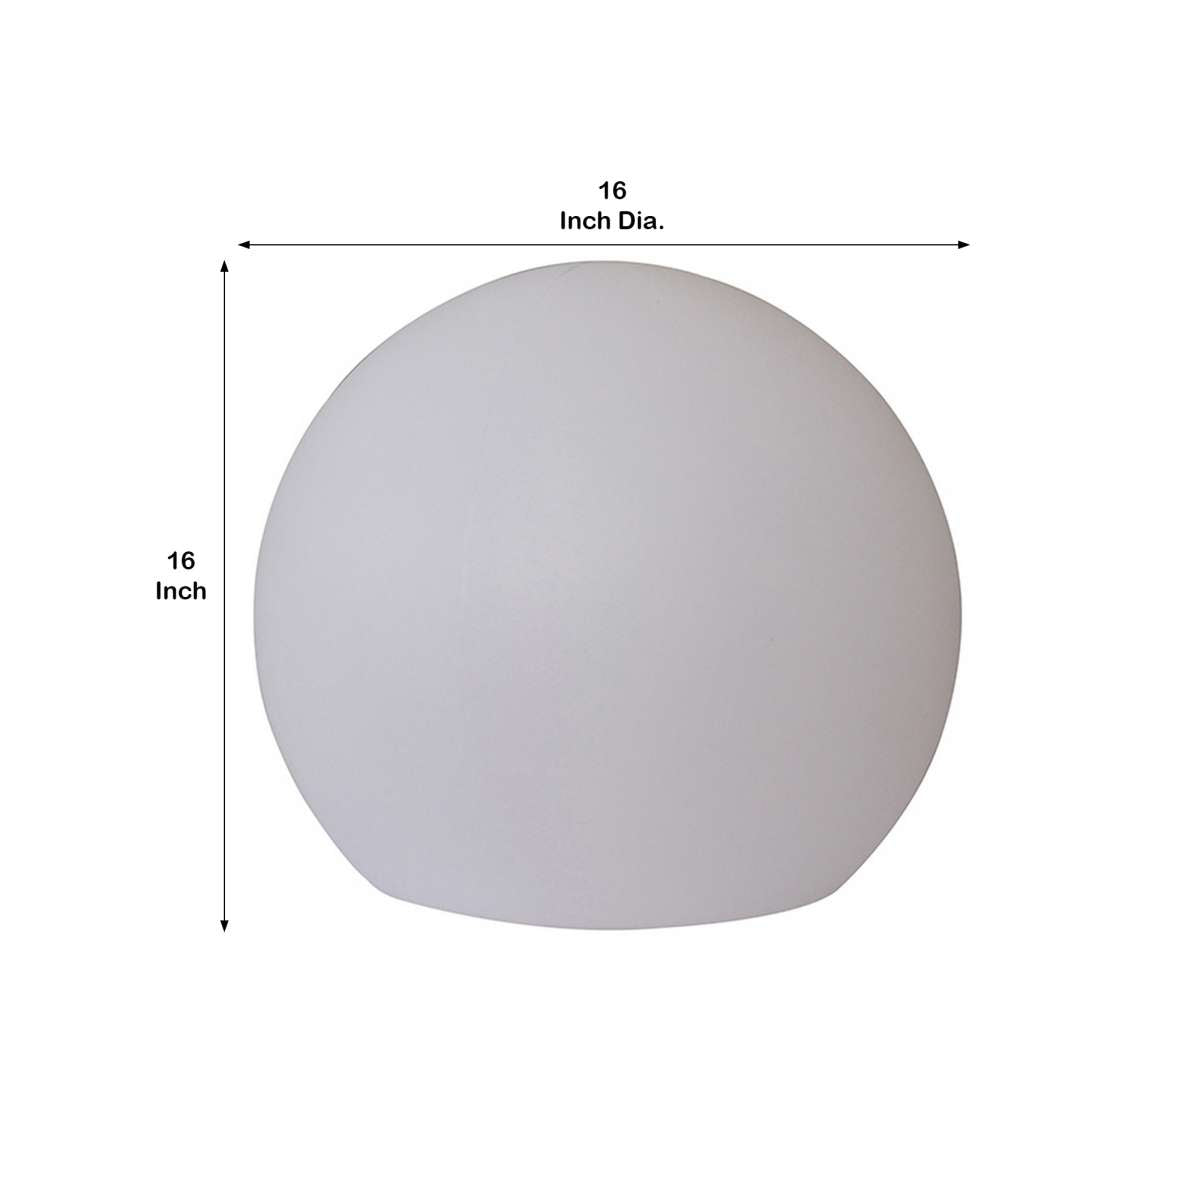 Lamp With Spherical Plastic Body And Inbuilt Led,Large,White By Benzara